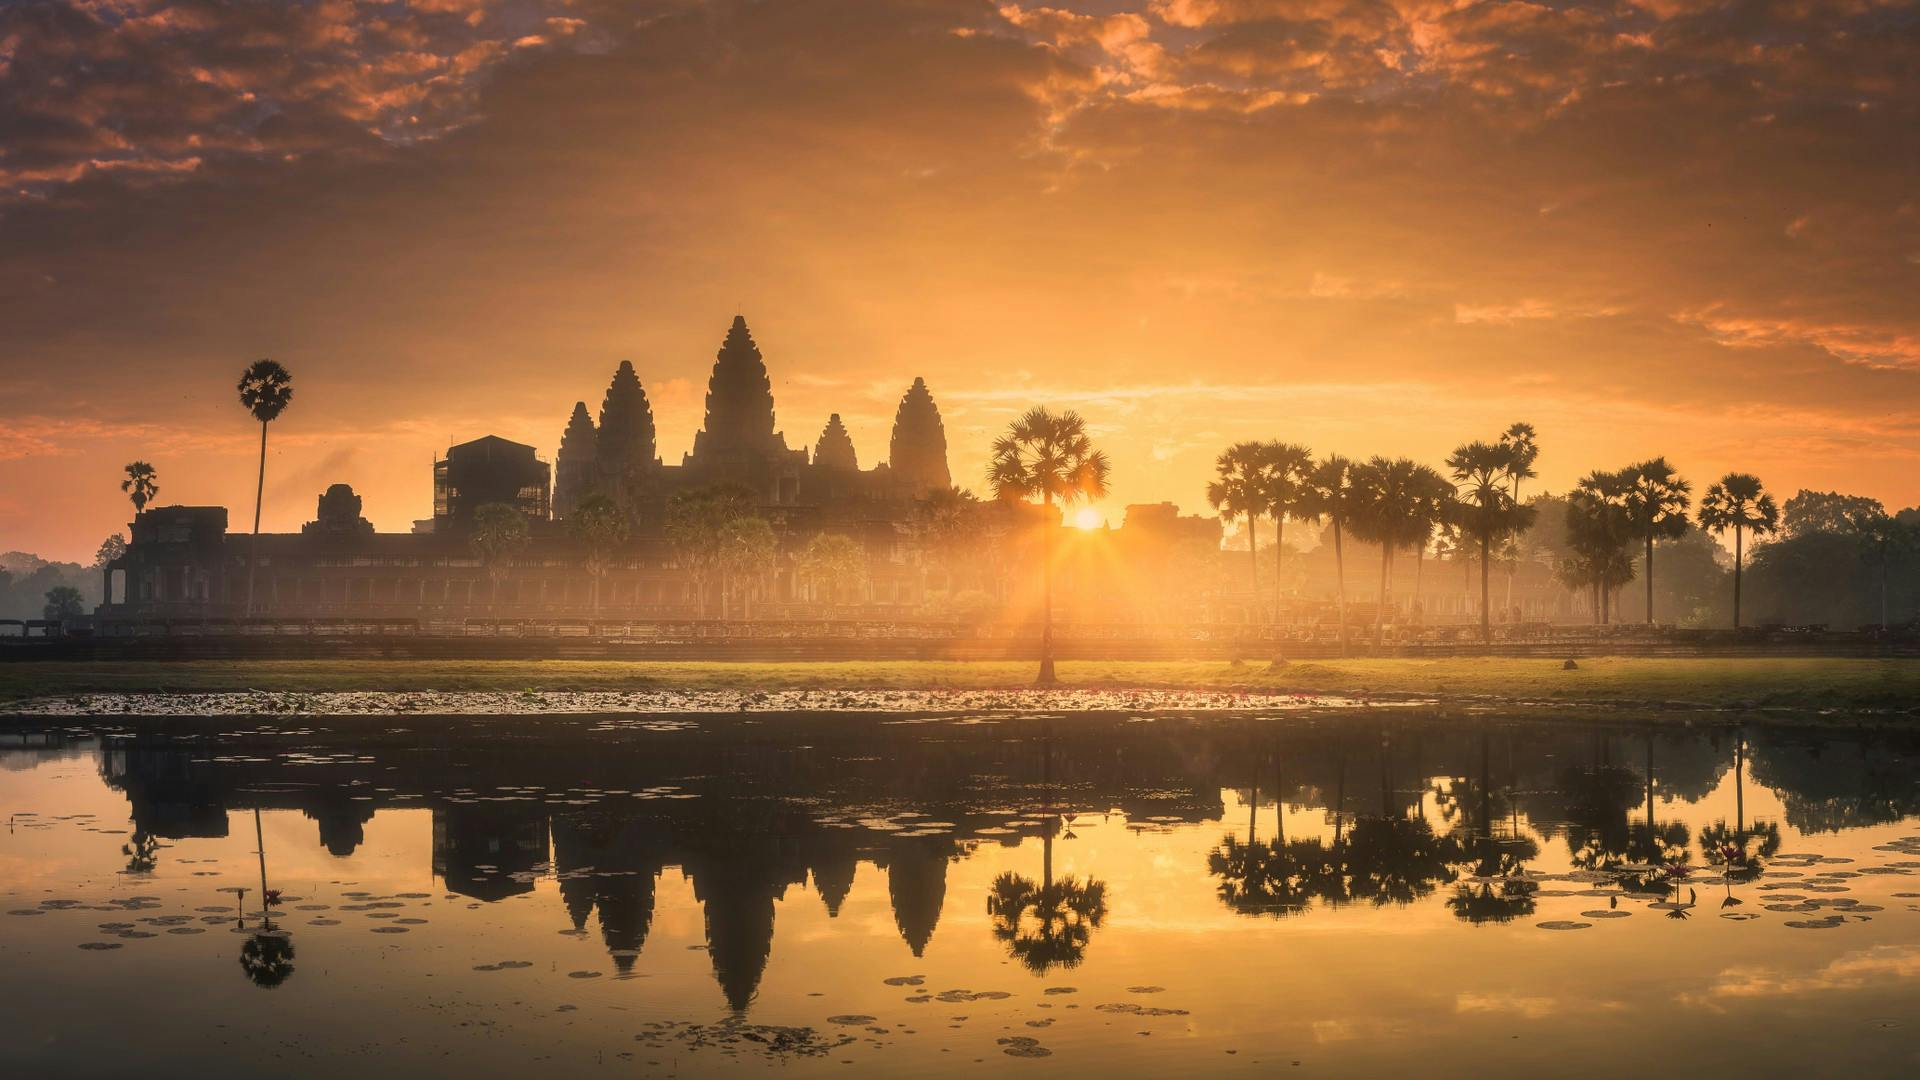 We're reimagining a fairer way to visit Cambodia